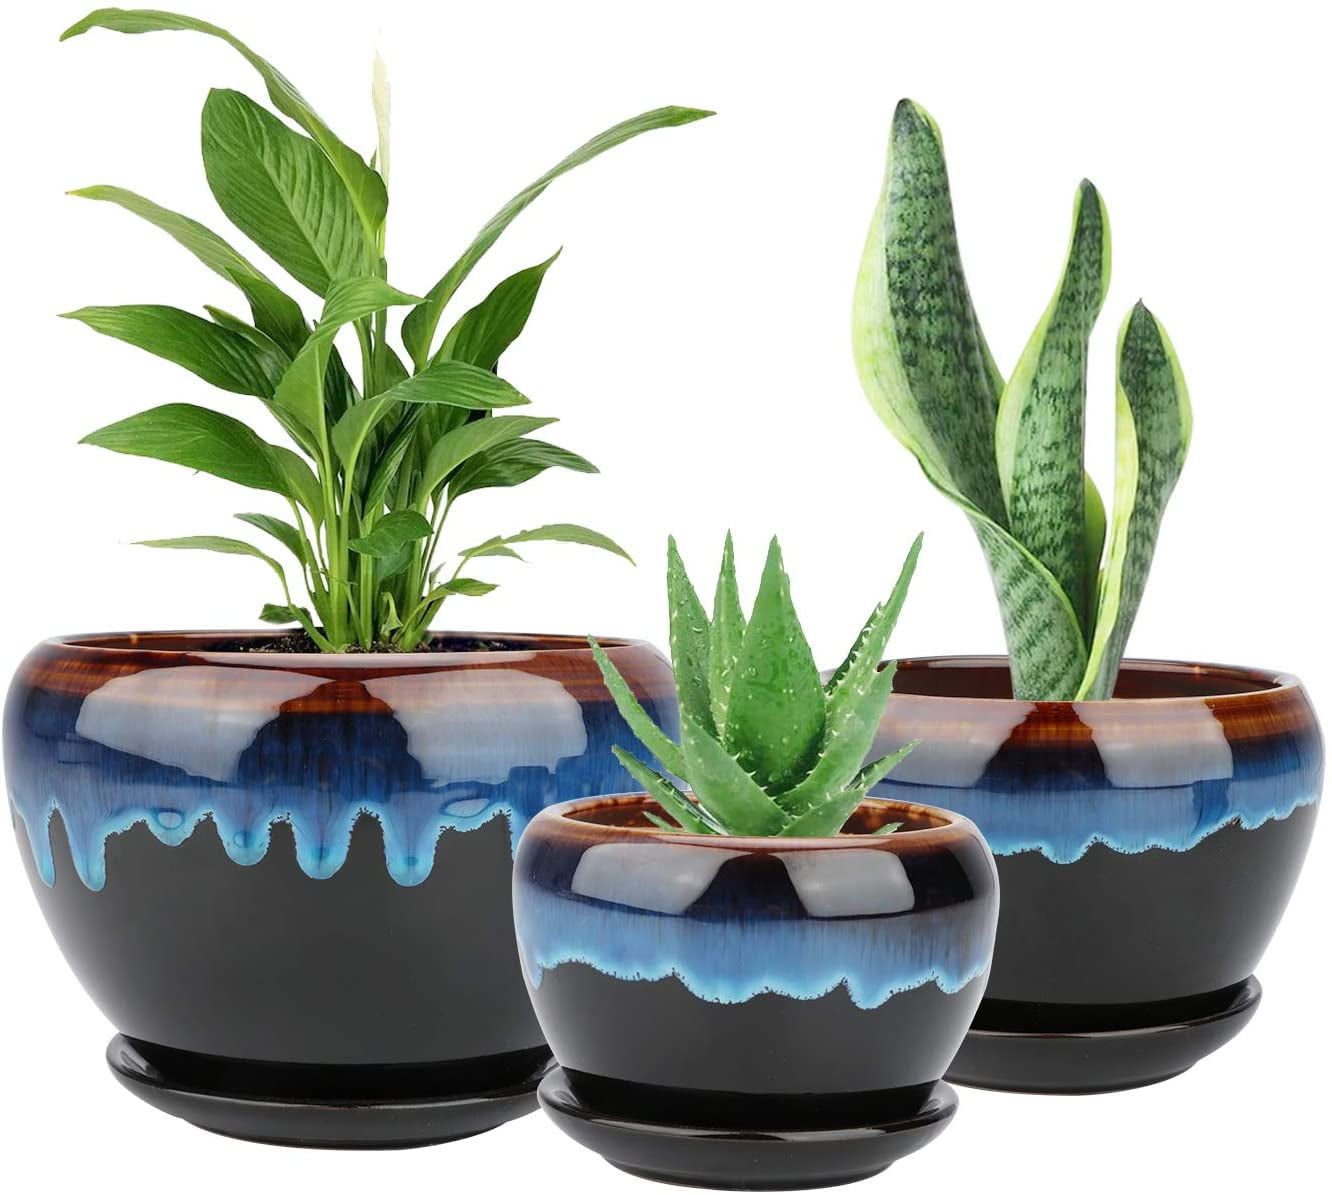 Ceramic Succulent Planter Pot with Drainage Hole and Connected Saucer Small to Large Size Round Flower Plant Pots for Plants Set of 3